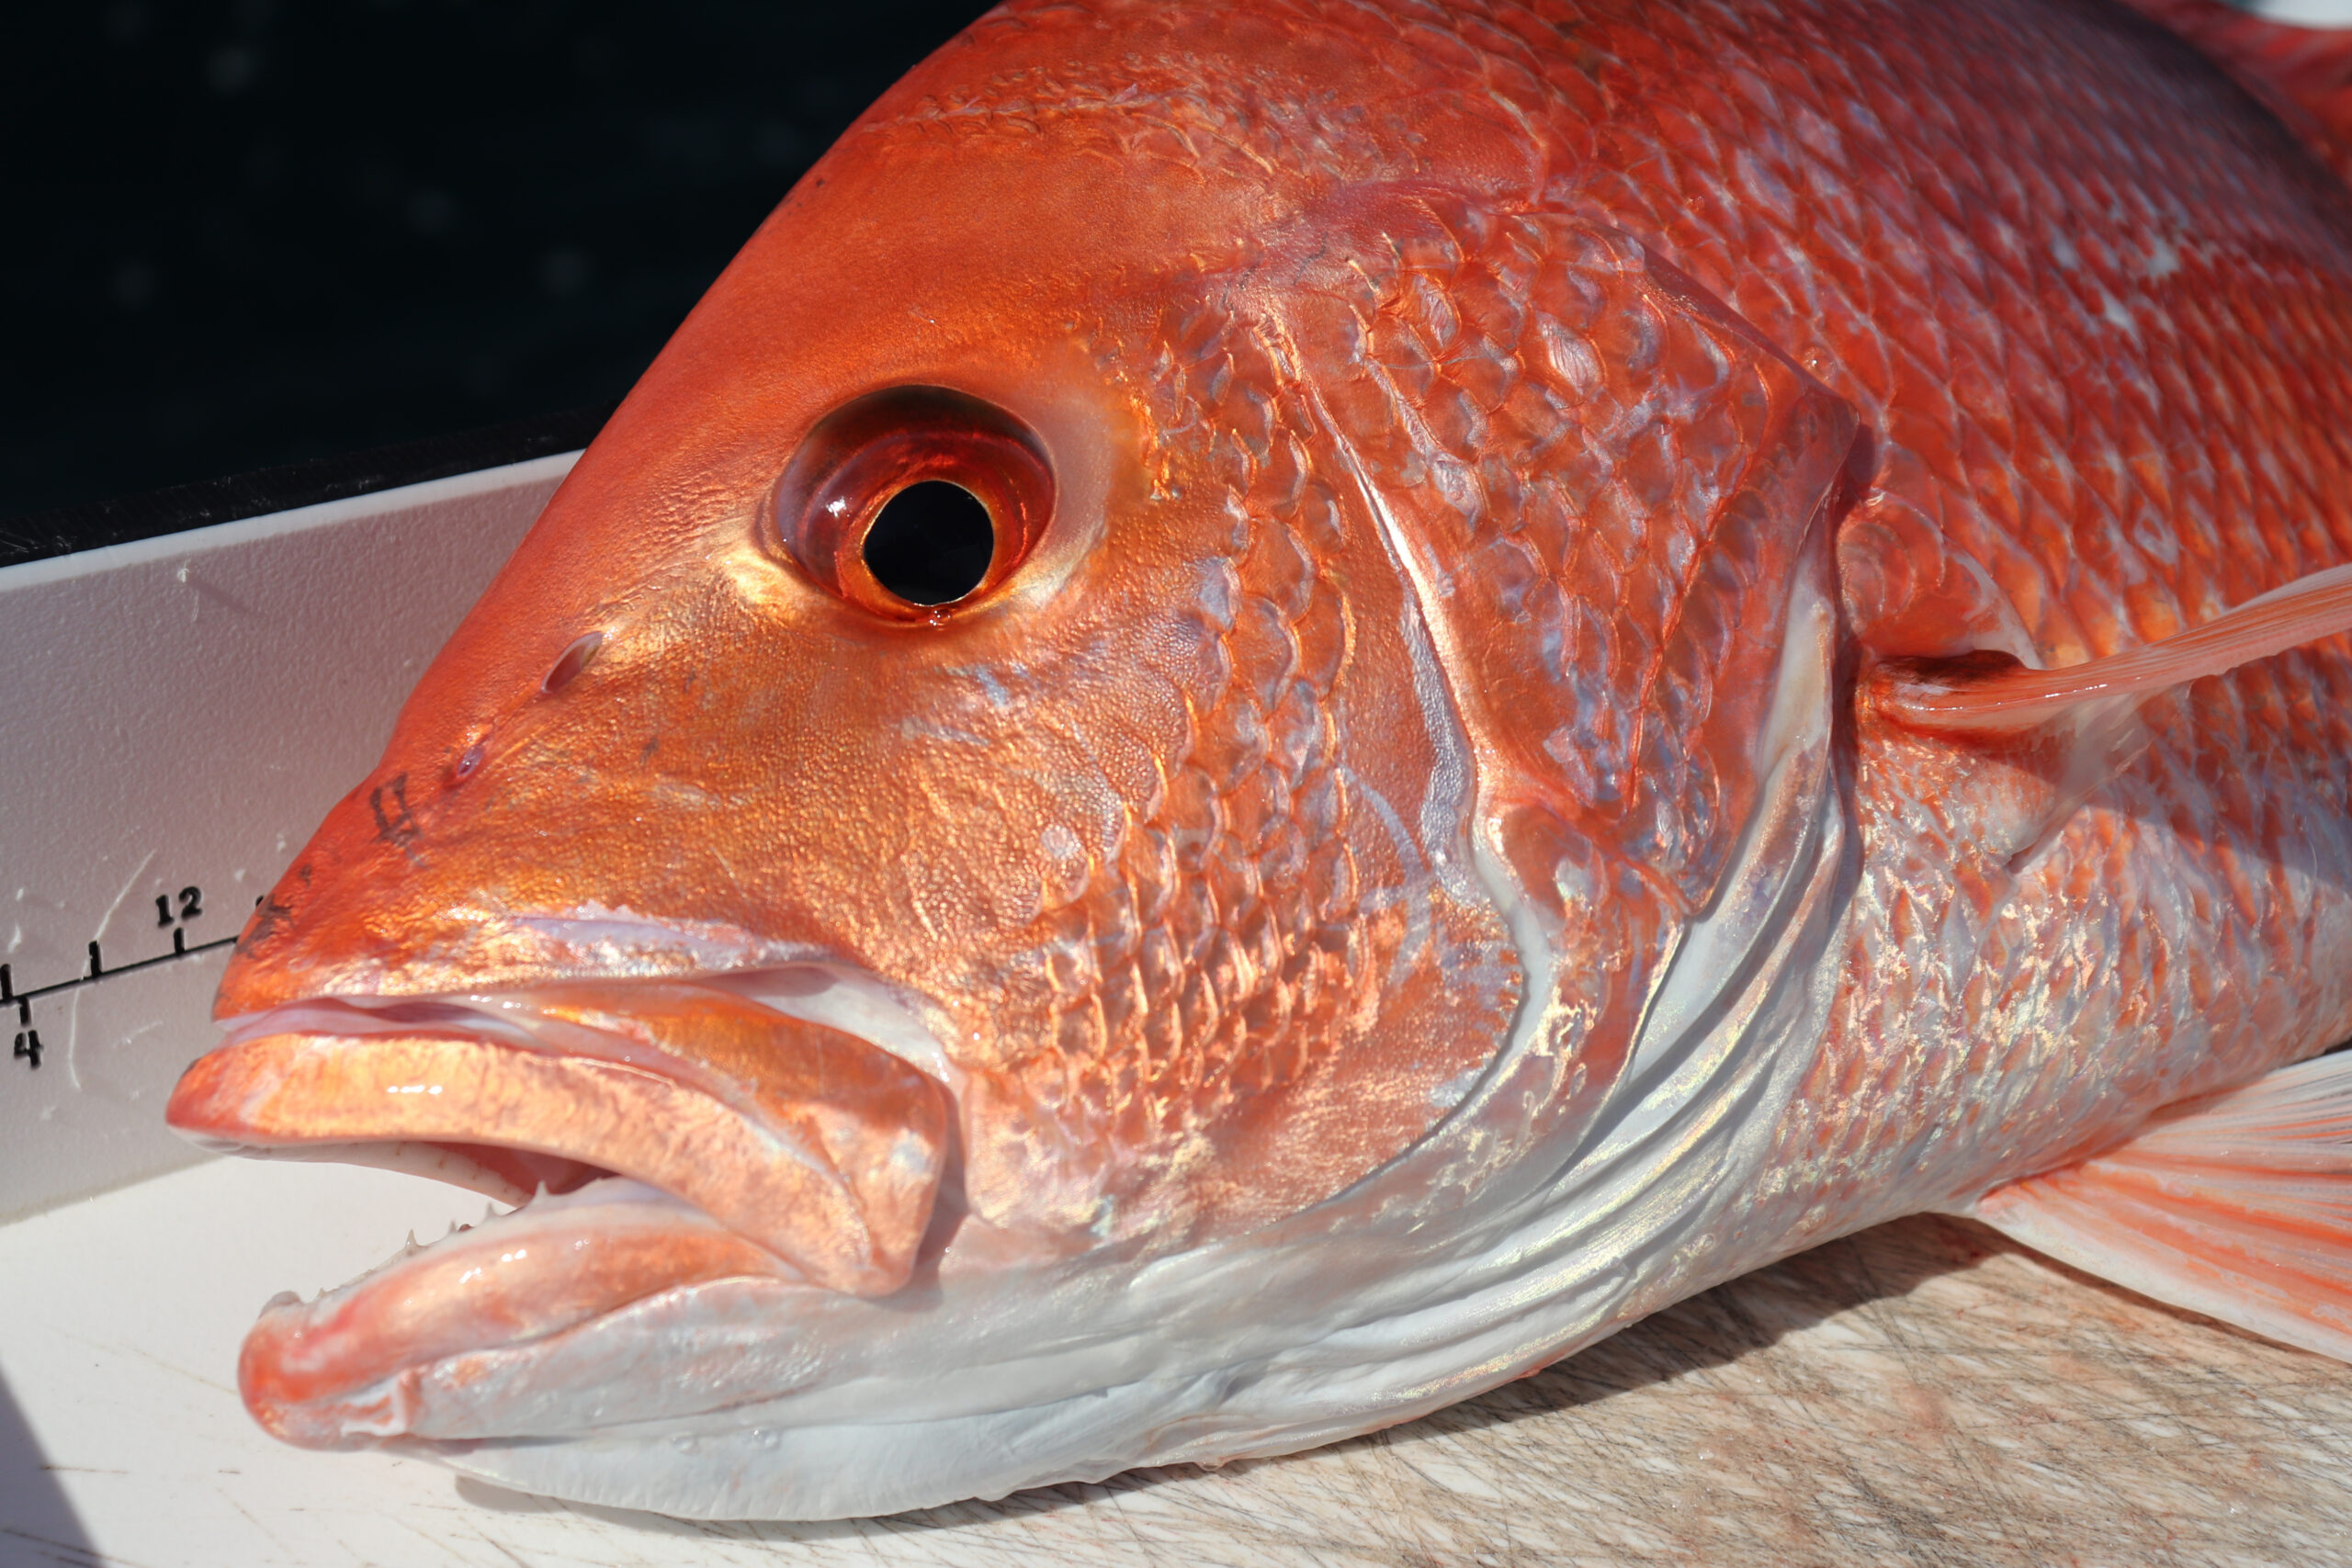 image: Red snapper. Credit: NOAA/Center for Sportfish Science and Conservation.